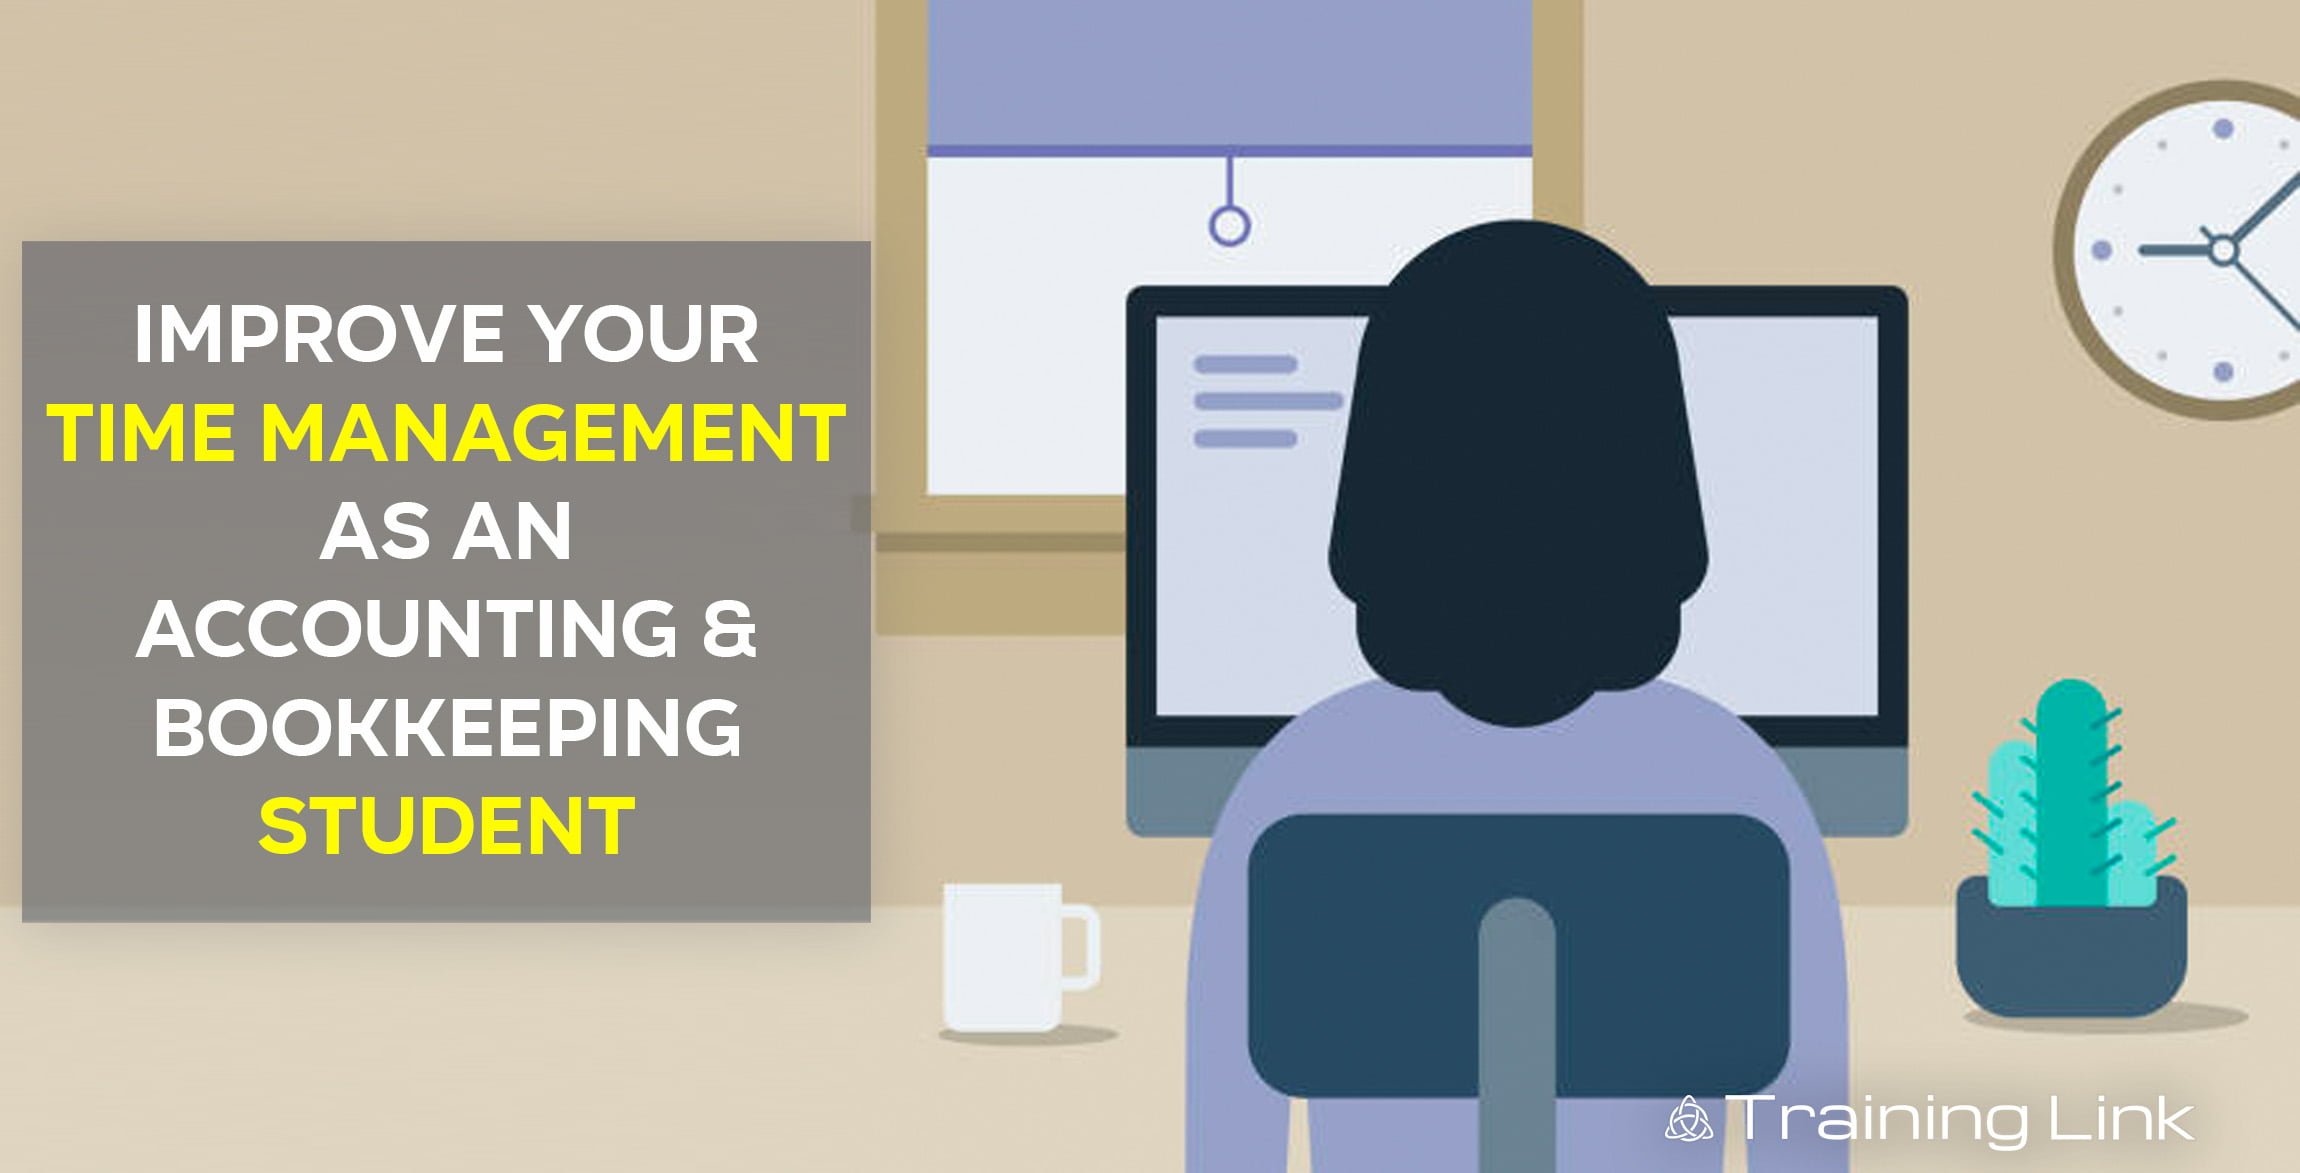 Improve your Time Management as an Accounting & Bookkeeping Student